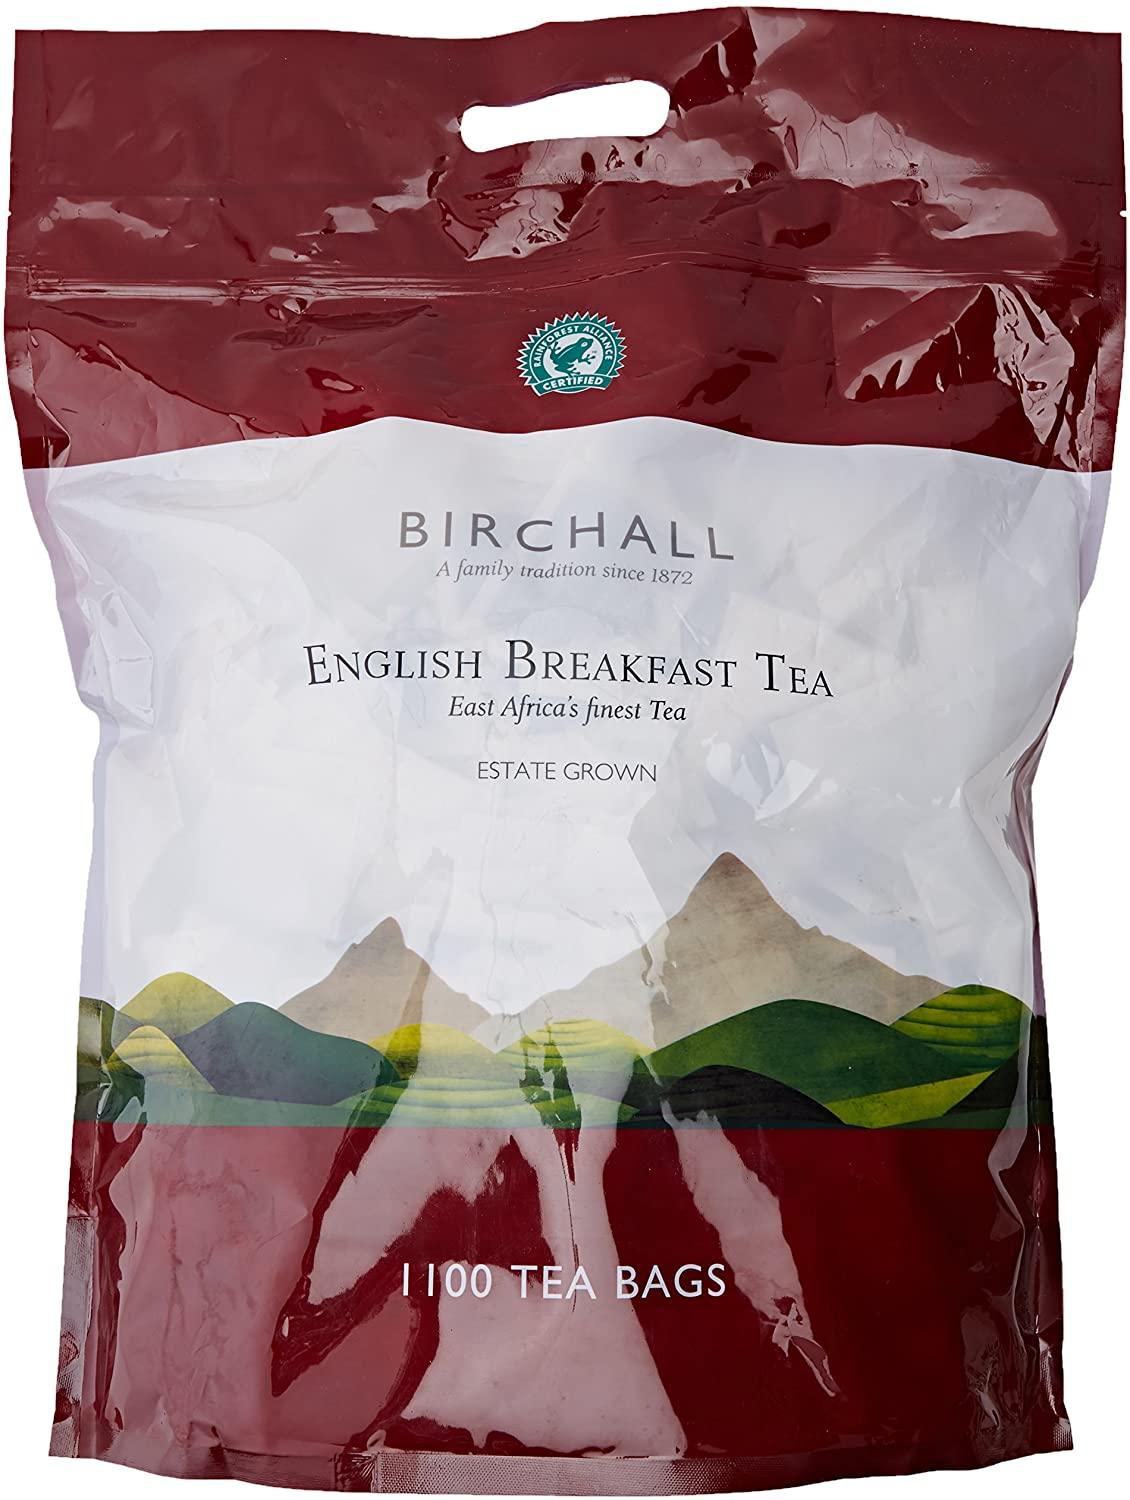 Birchall Tea - English Breakfast 1100 1-Cup Tea Bags for Catering (Rainforest Alliance) - Vending Superstore